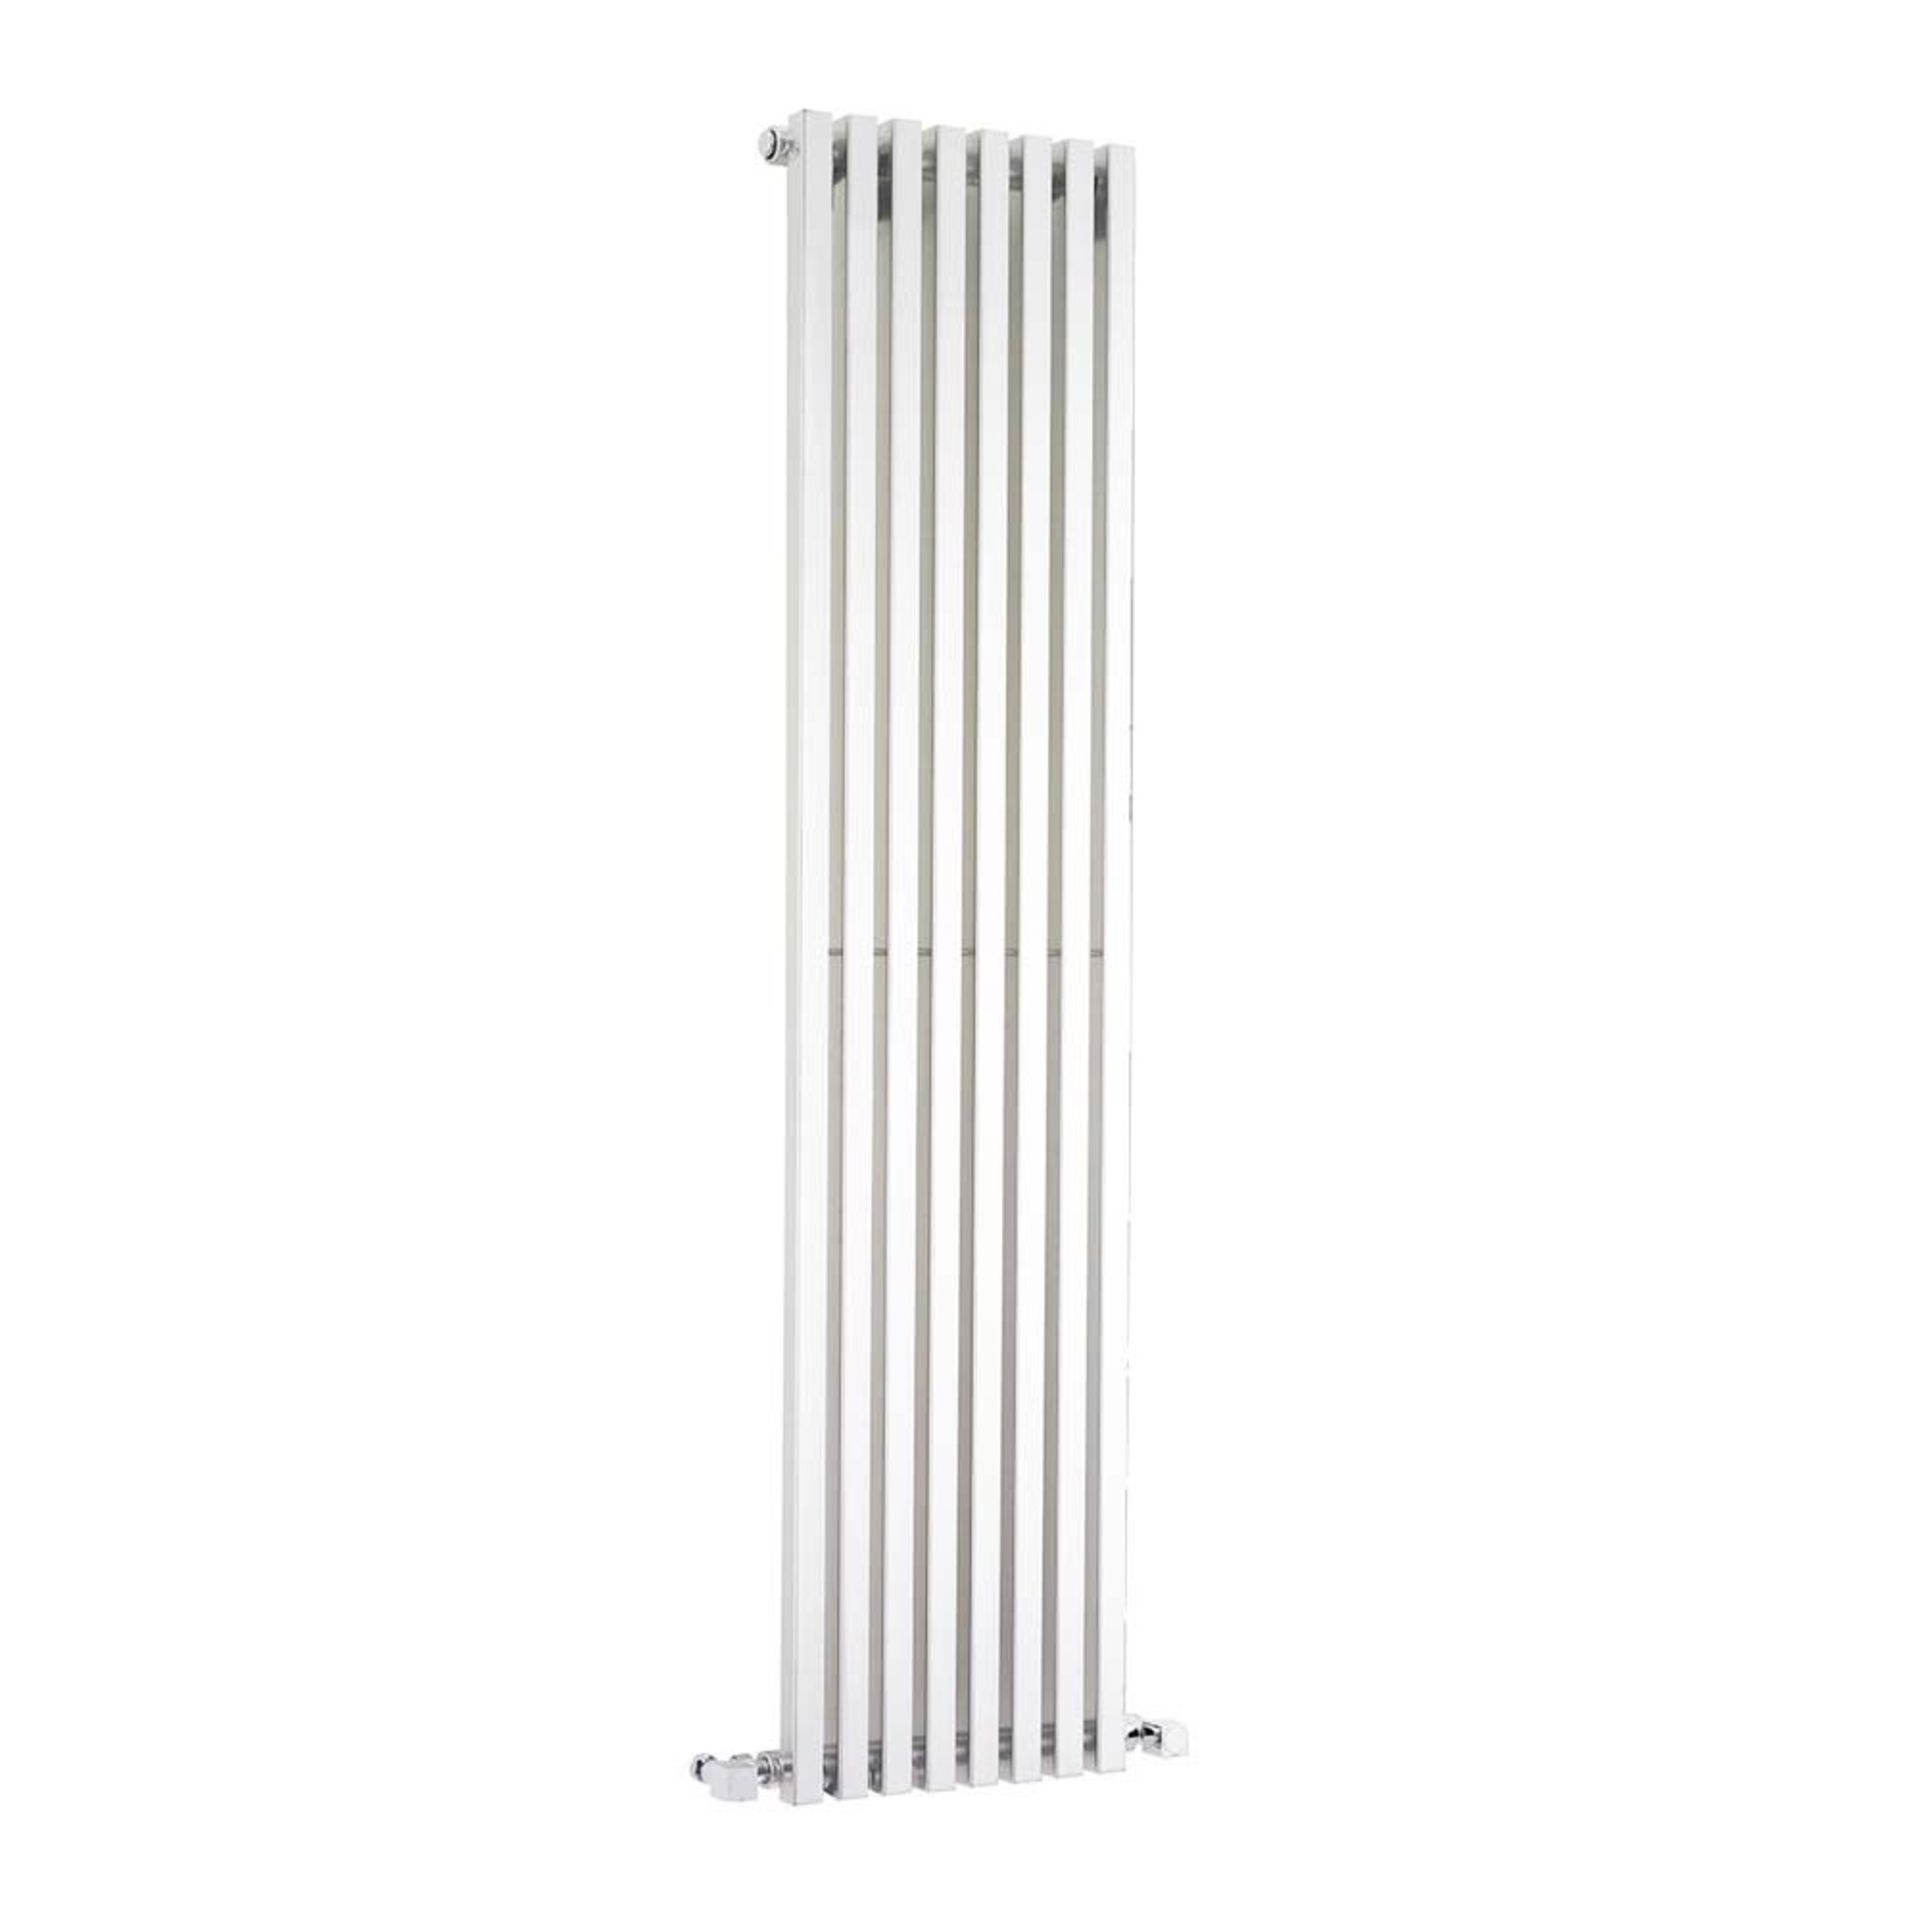 1 x Warmbase Kintonic 405x1800mm Contemporary Chrome Vertical Radiator - New Boxed Stock - RRP £410 - Image 2 of 3